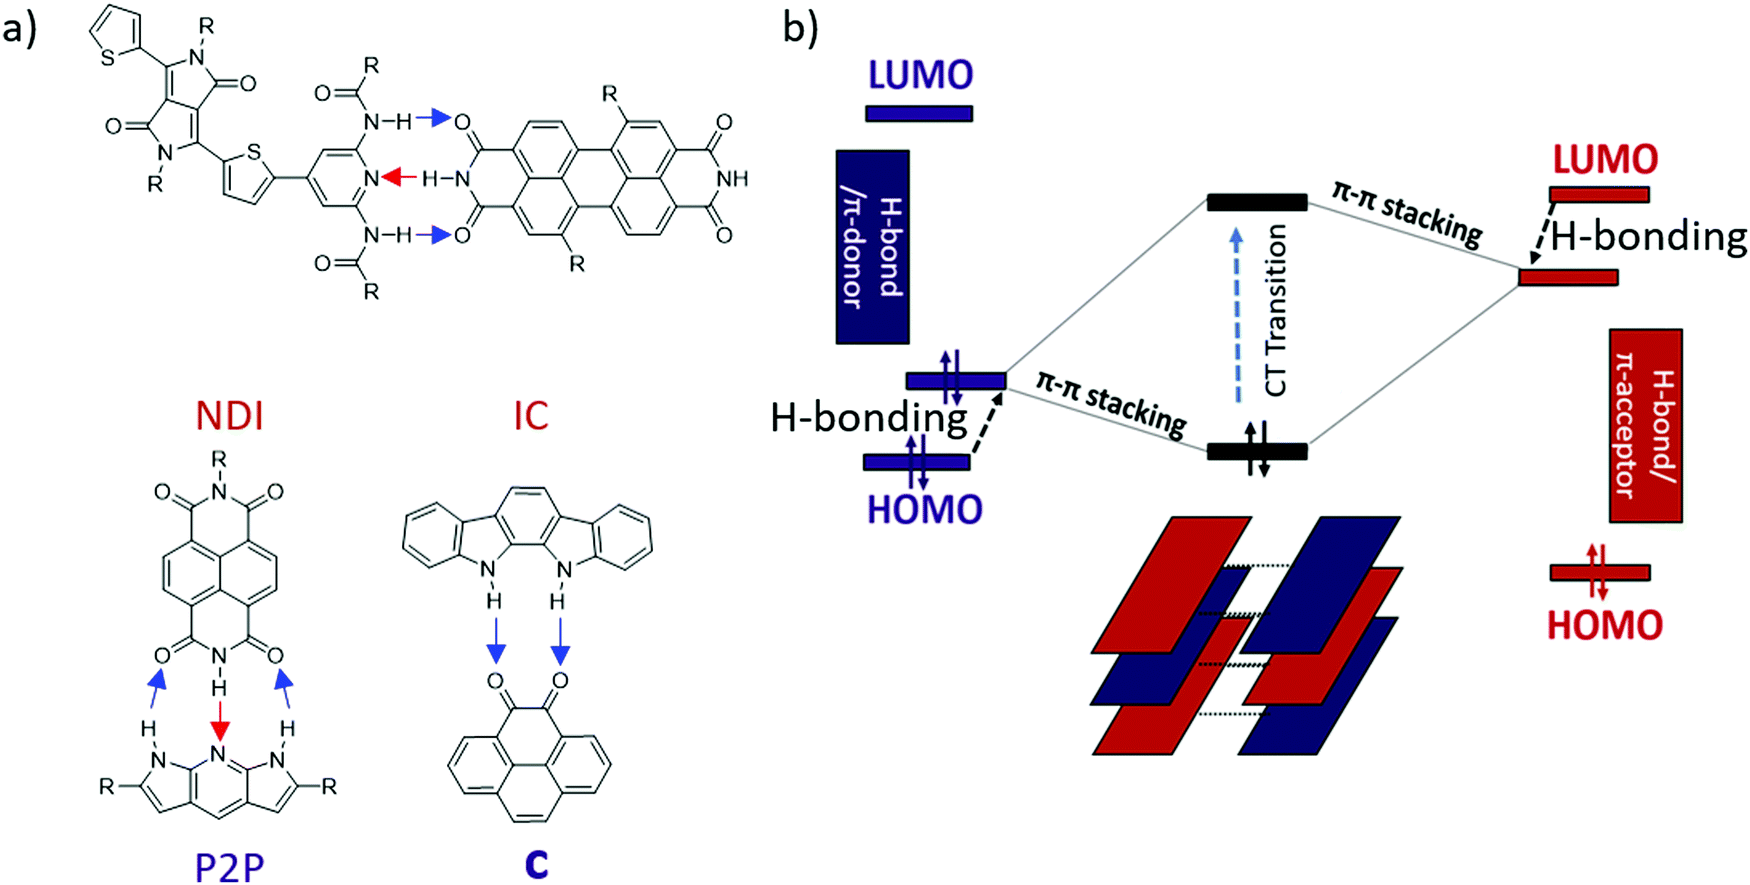 Band gap engineering of donor–acceptor co-crystals by complementary  two-point hydrogen bonding - Materials Chemistry Frontiers (RSC Publishing)